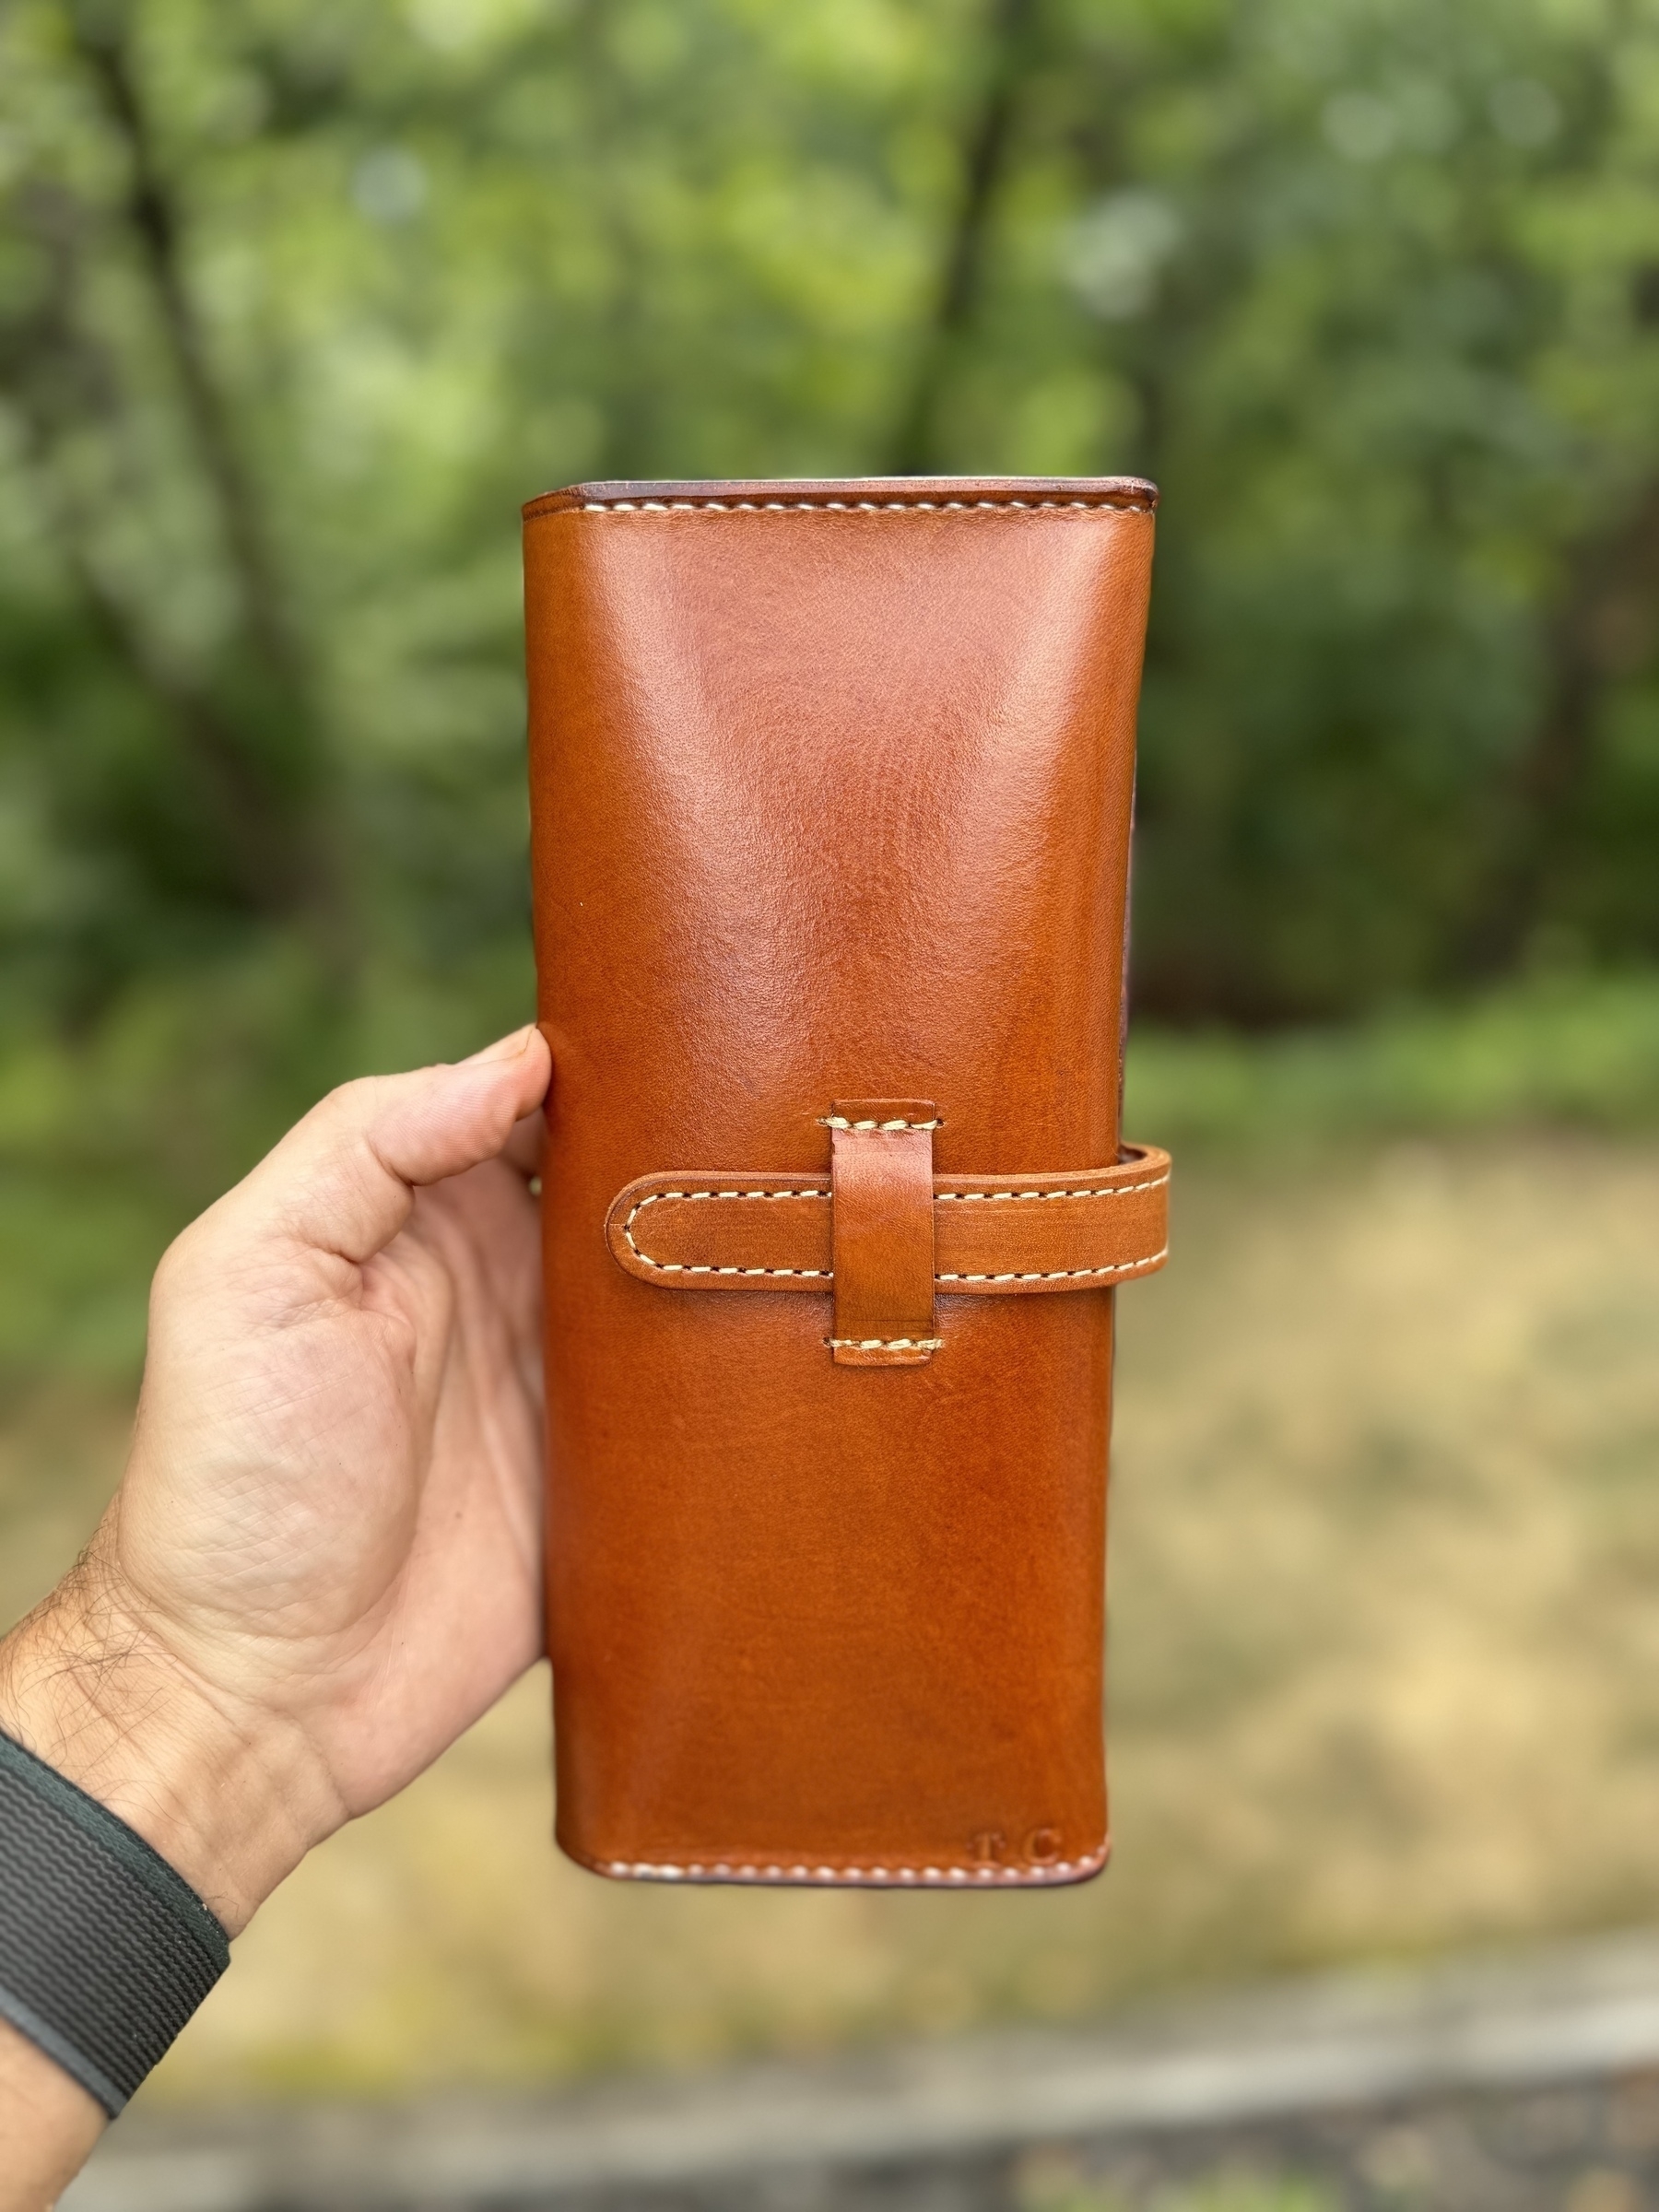 A hand is holding a brown leather cigar case against a blurred outdoor background of greenery and grass.